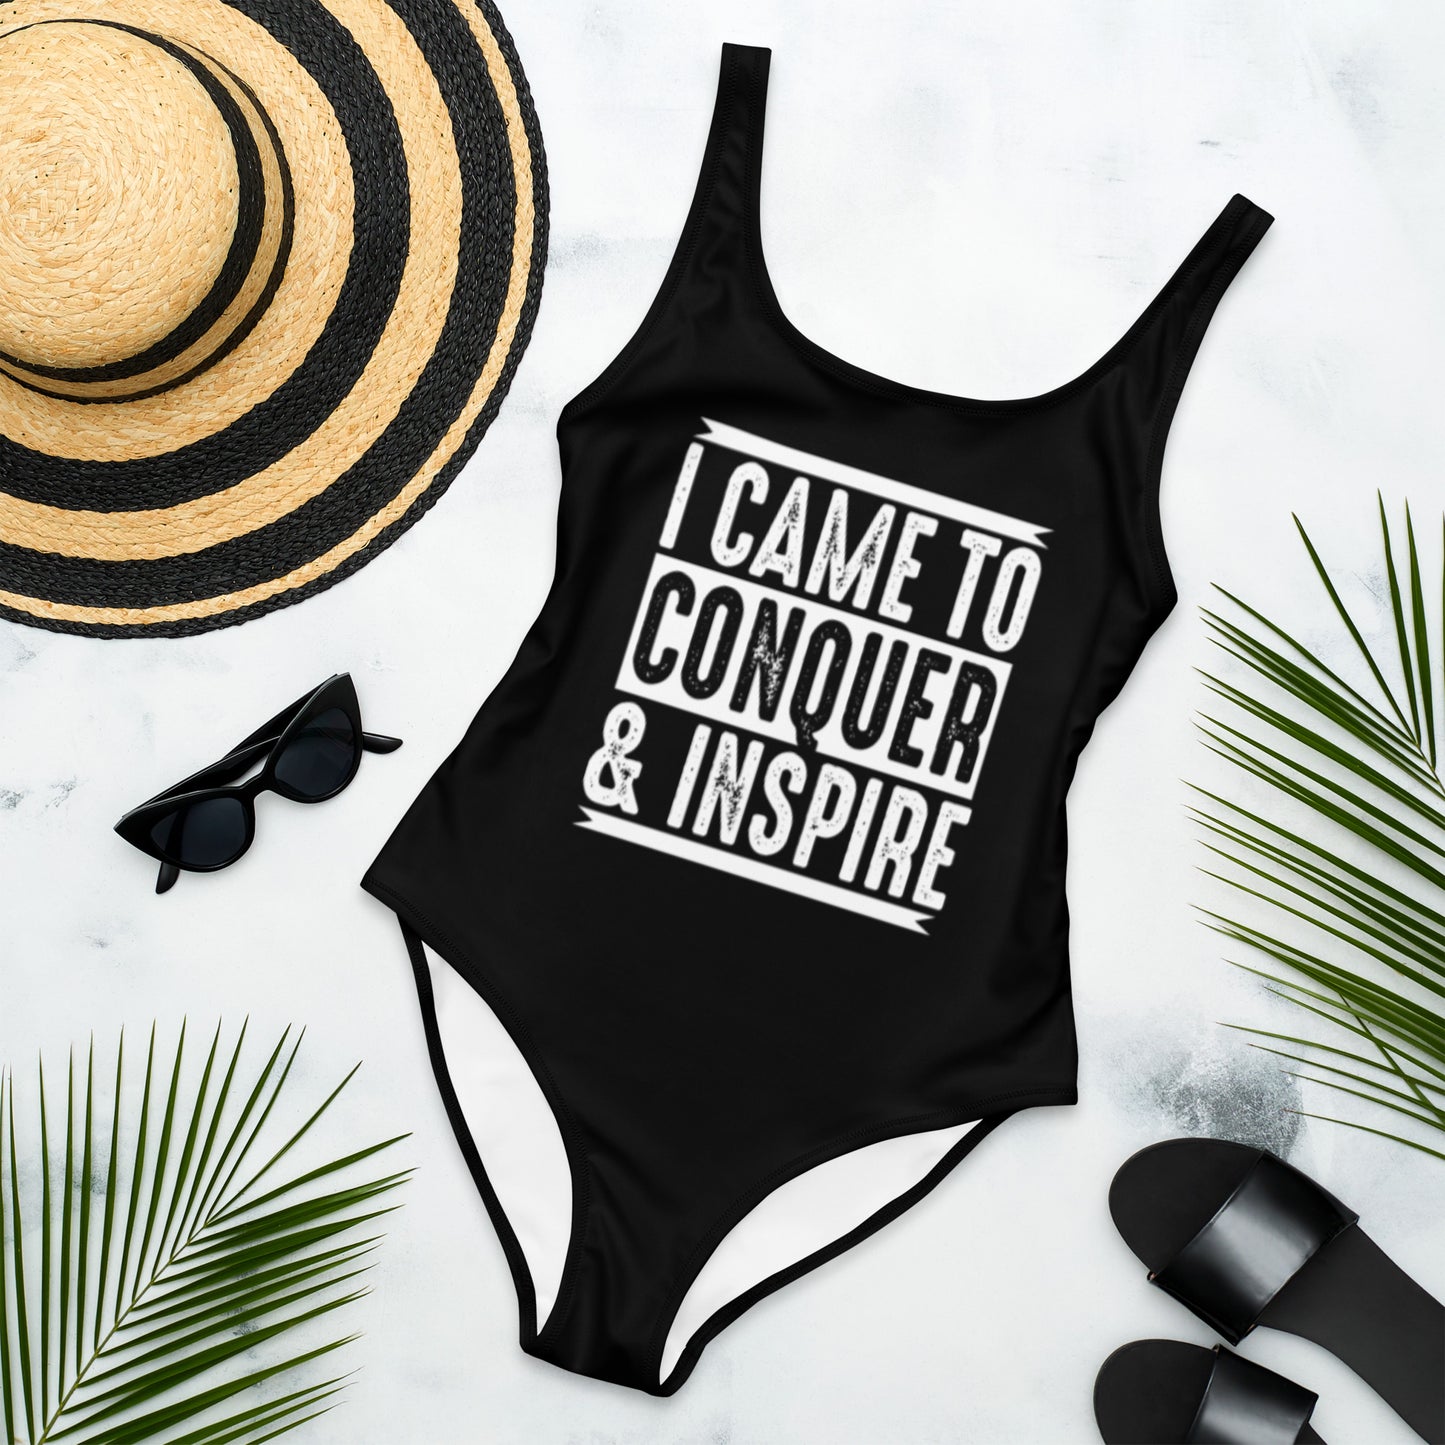 I Came To Conquer & Inspire | One-Piece Swimsuit